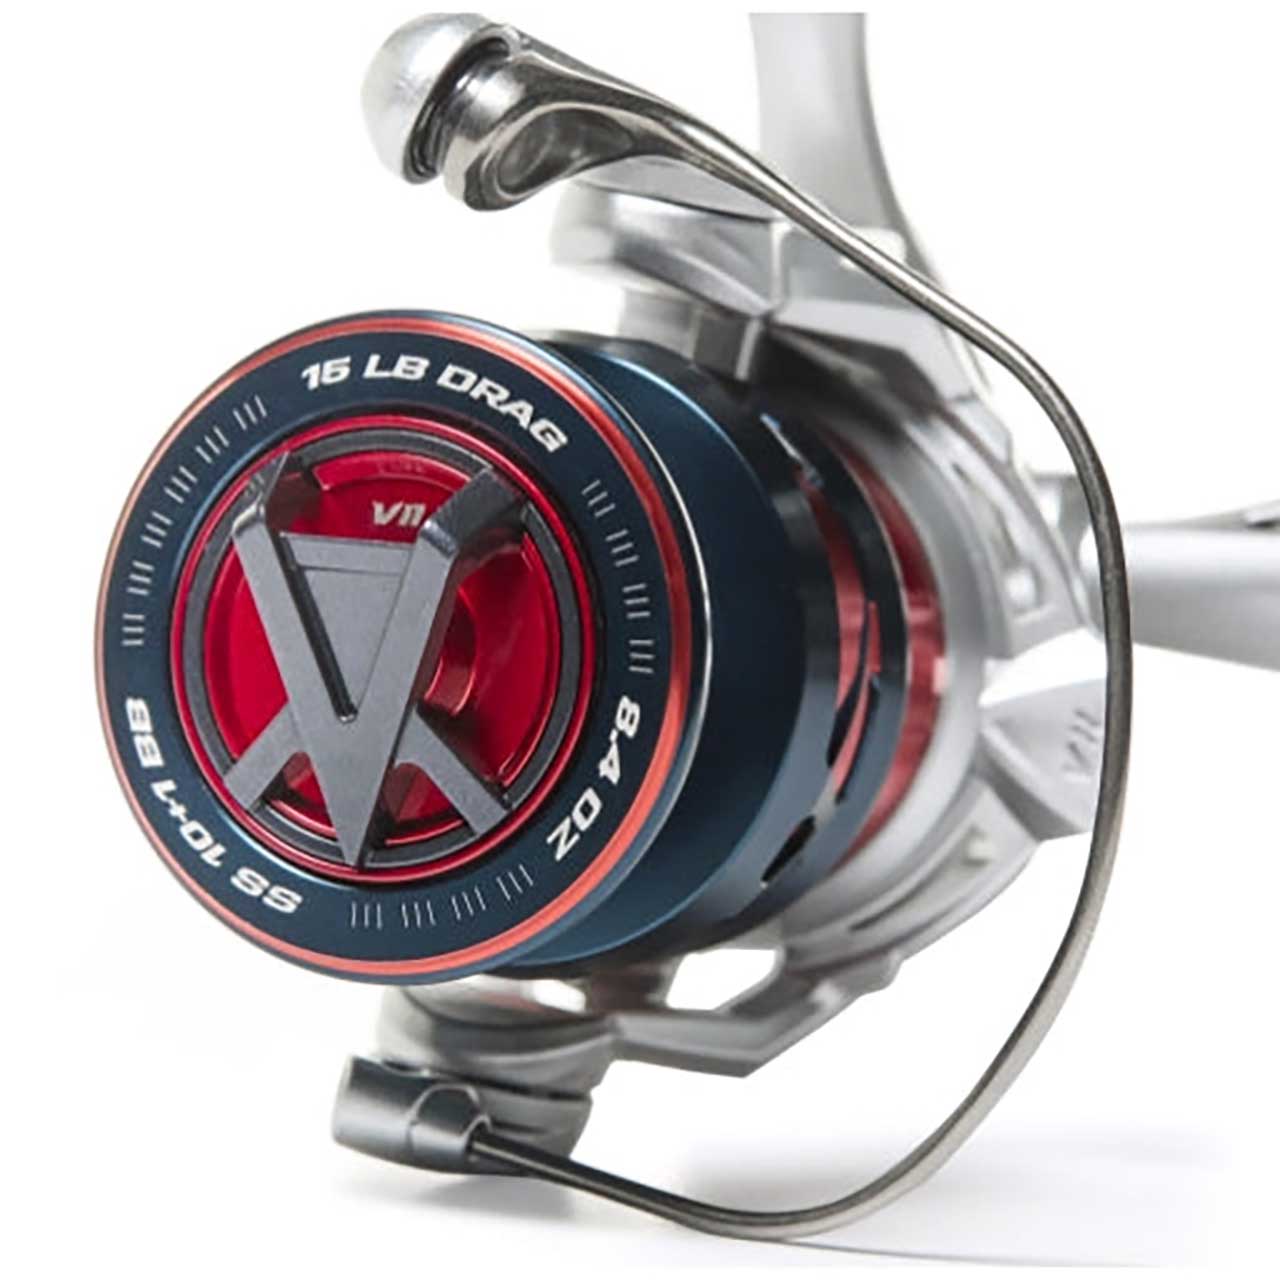 Sevin Announces GS and GX Series Spinning Reels - Texas Fish